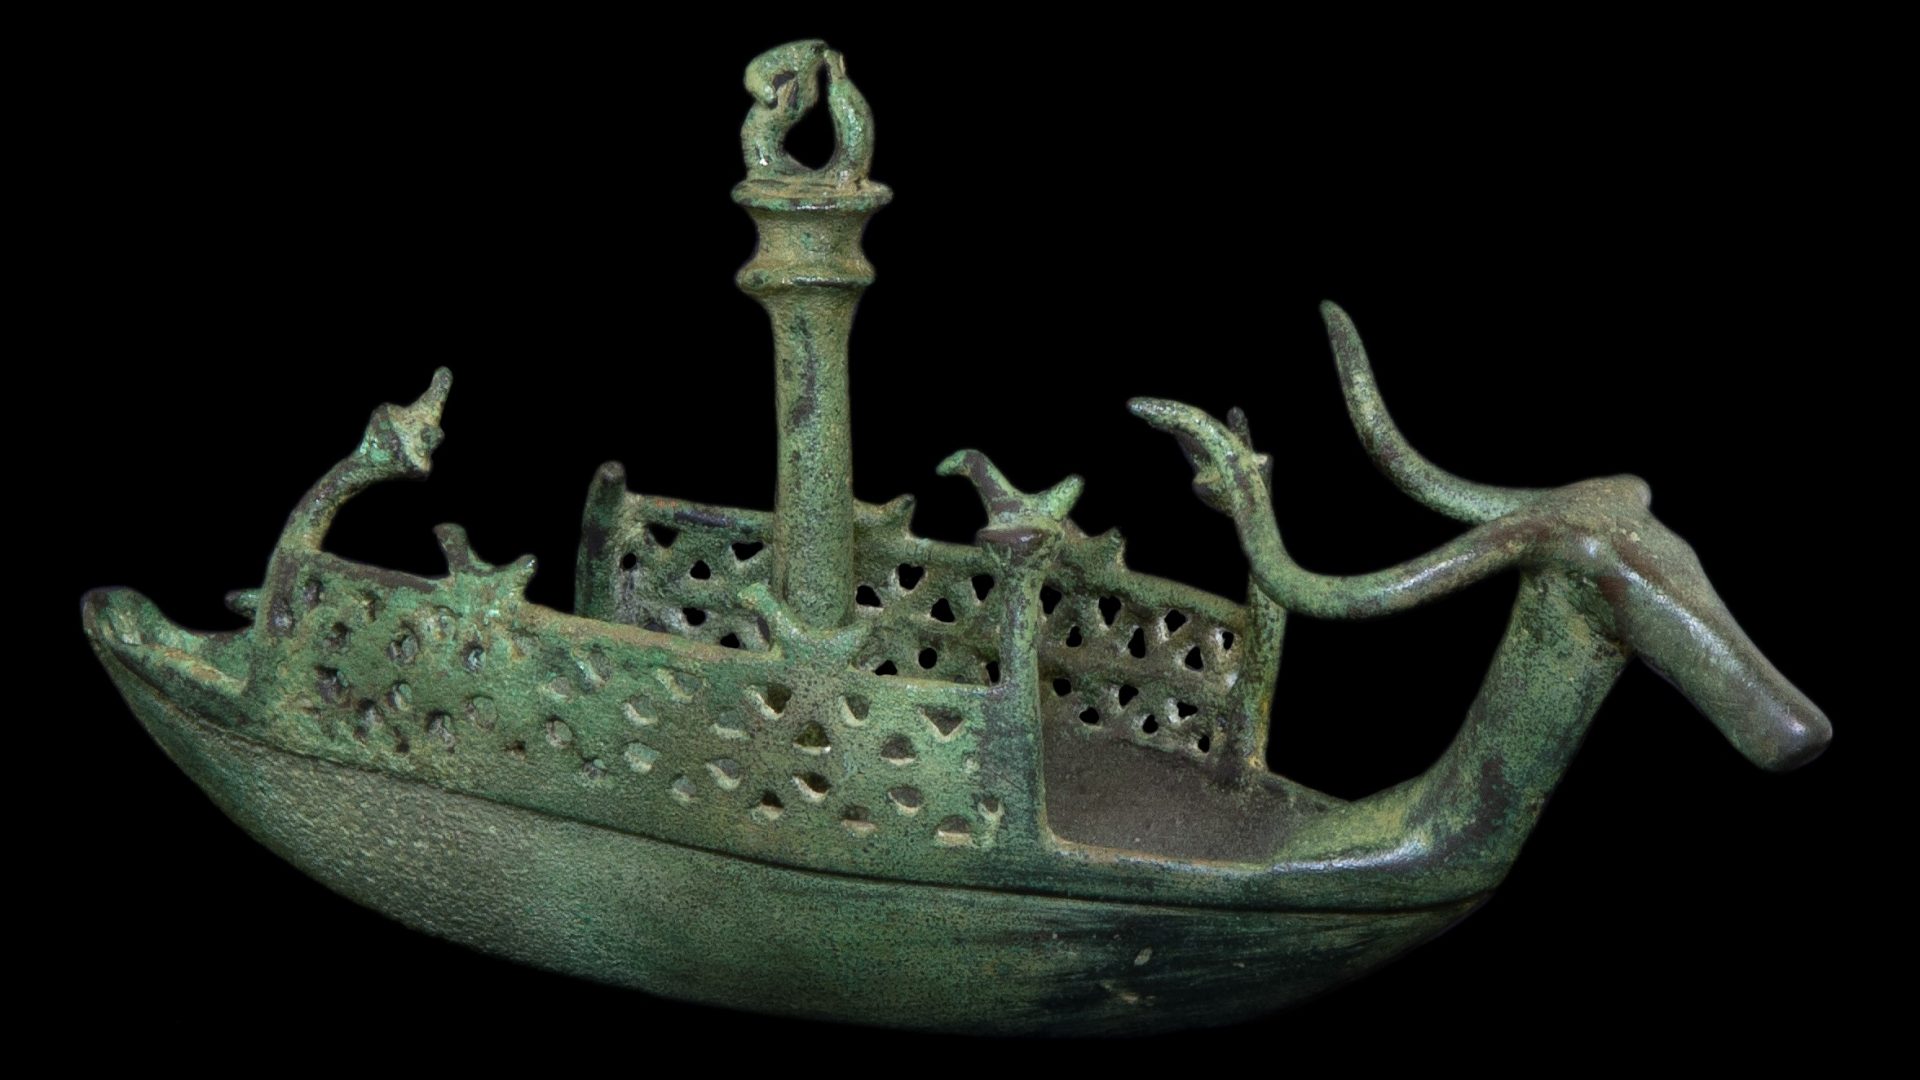 A small, bronze “navicella” boat made by Sardinian craftsmen more than 3,000 years ago. Photo: National Archaeological Museum of Cagliari